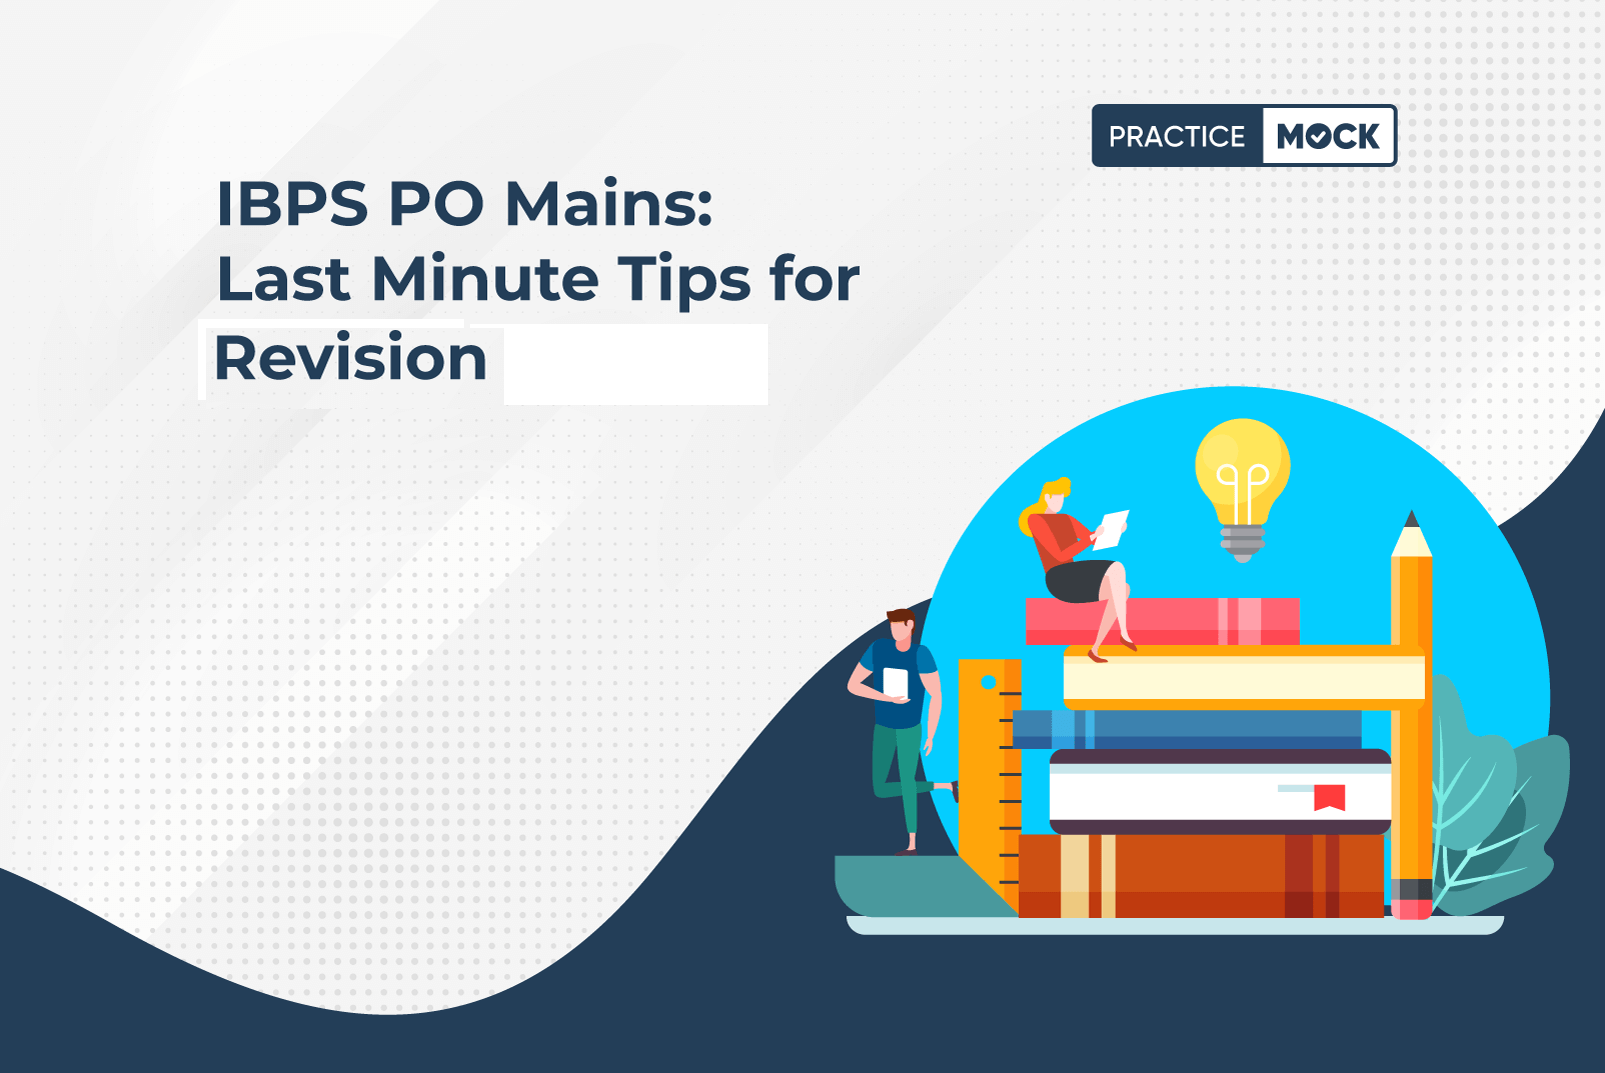 IBPS PO Mains Last Minute Tips for Revision